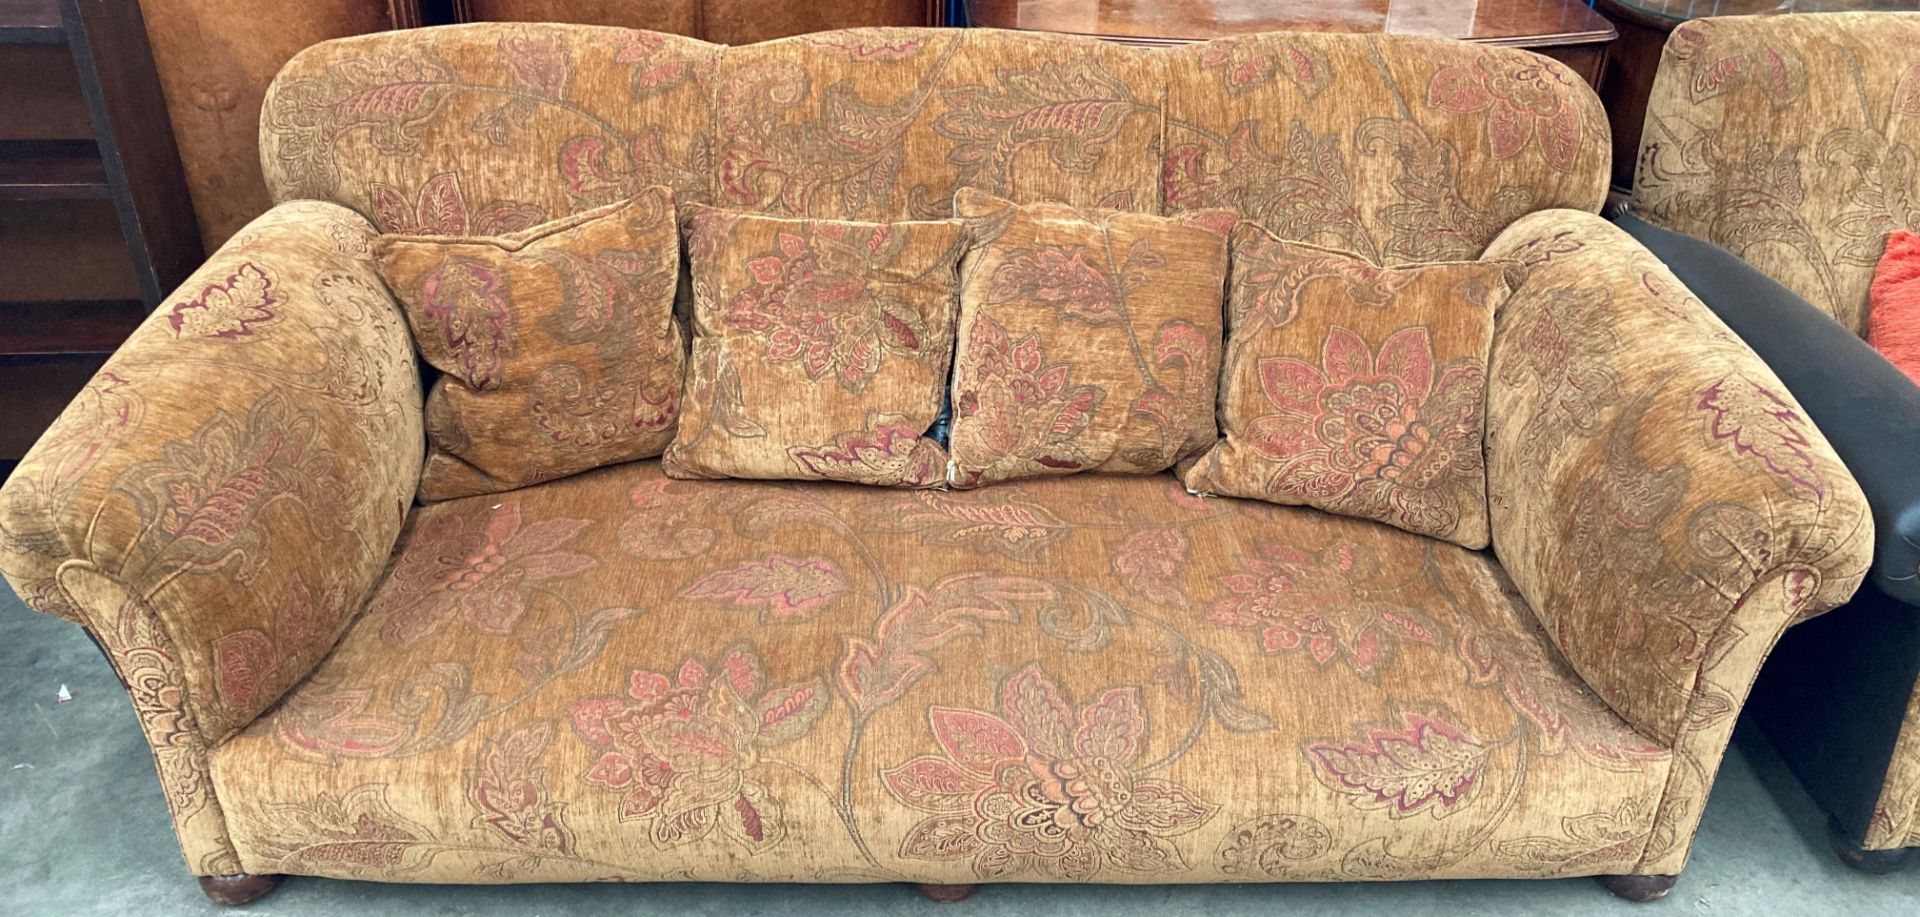 A medium brown floral upholstered three piece suite with brown vinyl sides and arms comprising a - Image 2 of 4